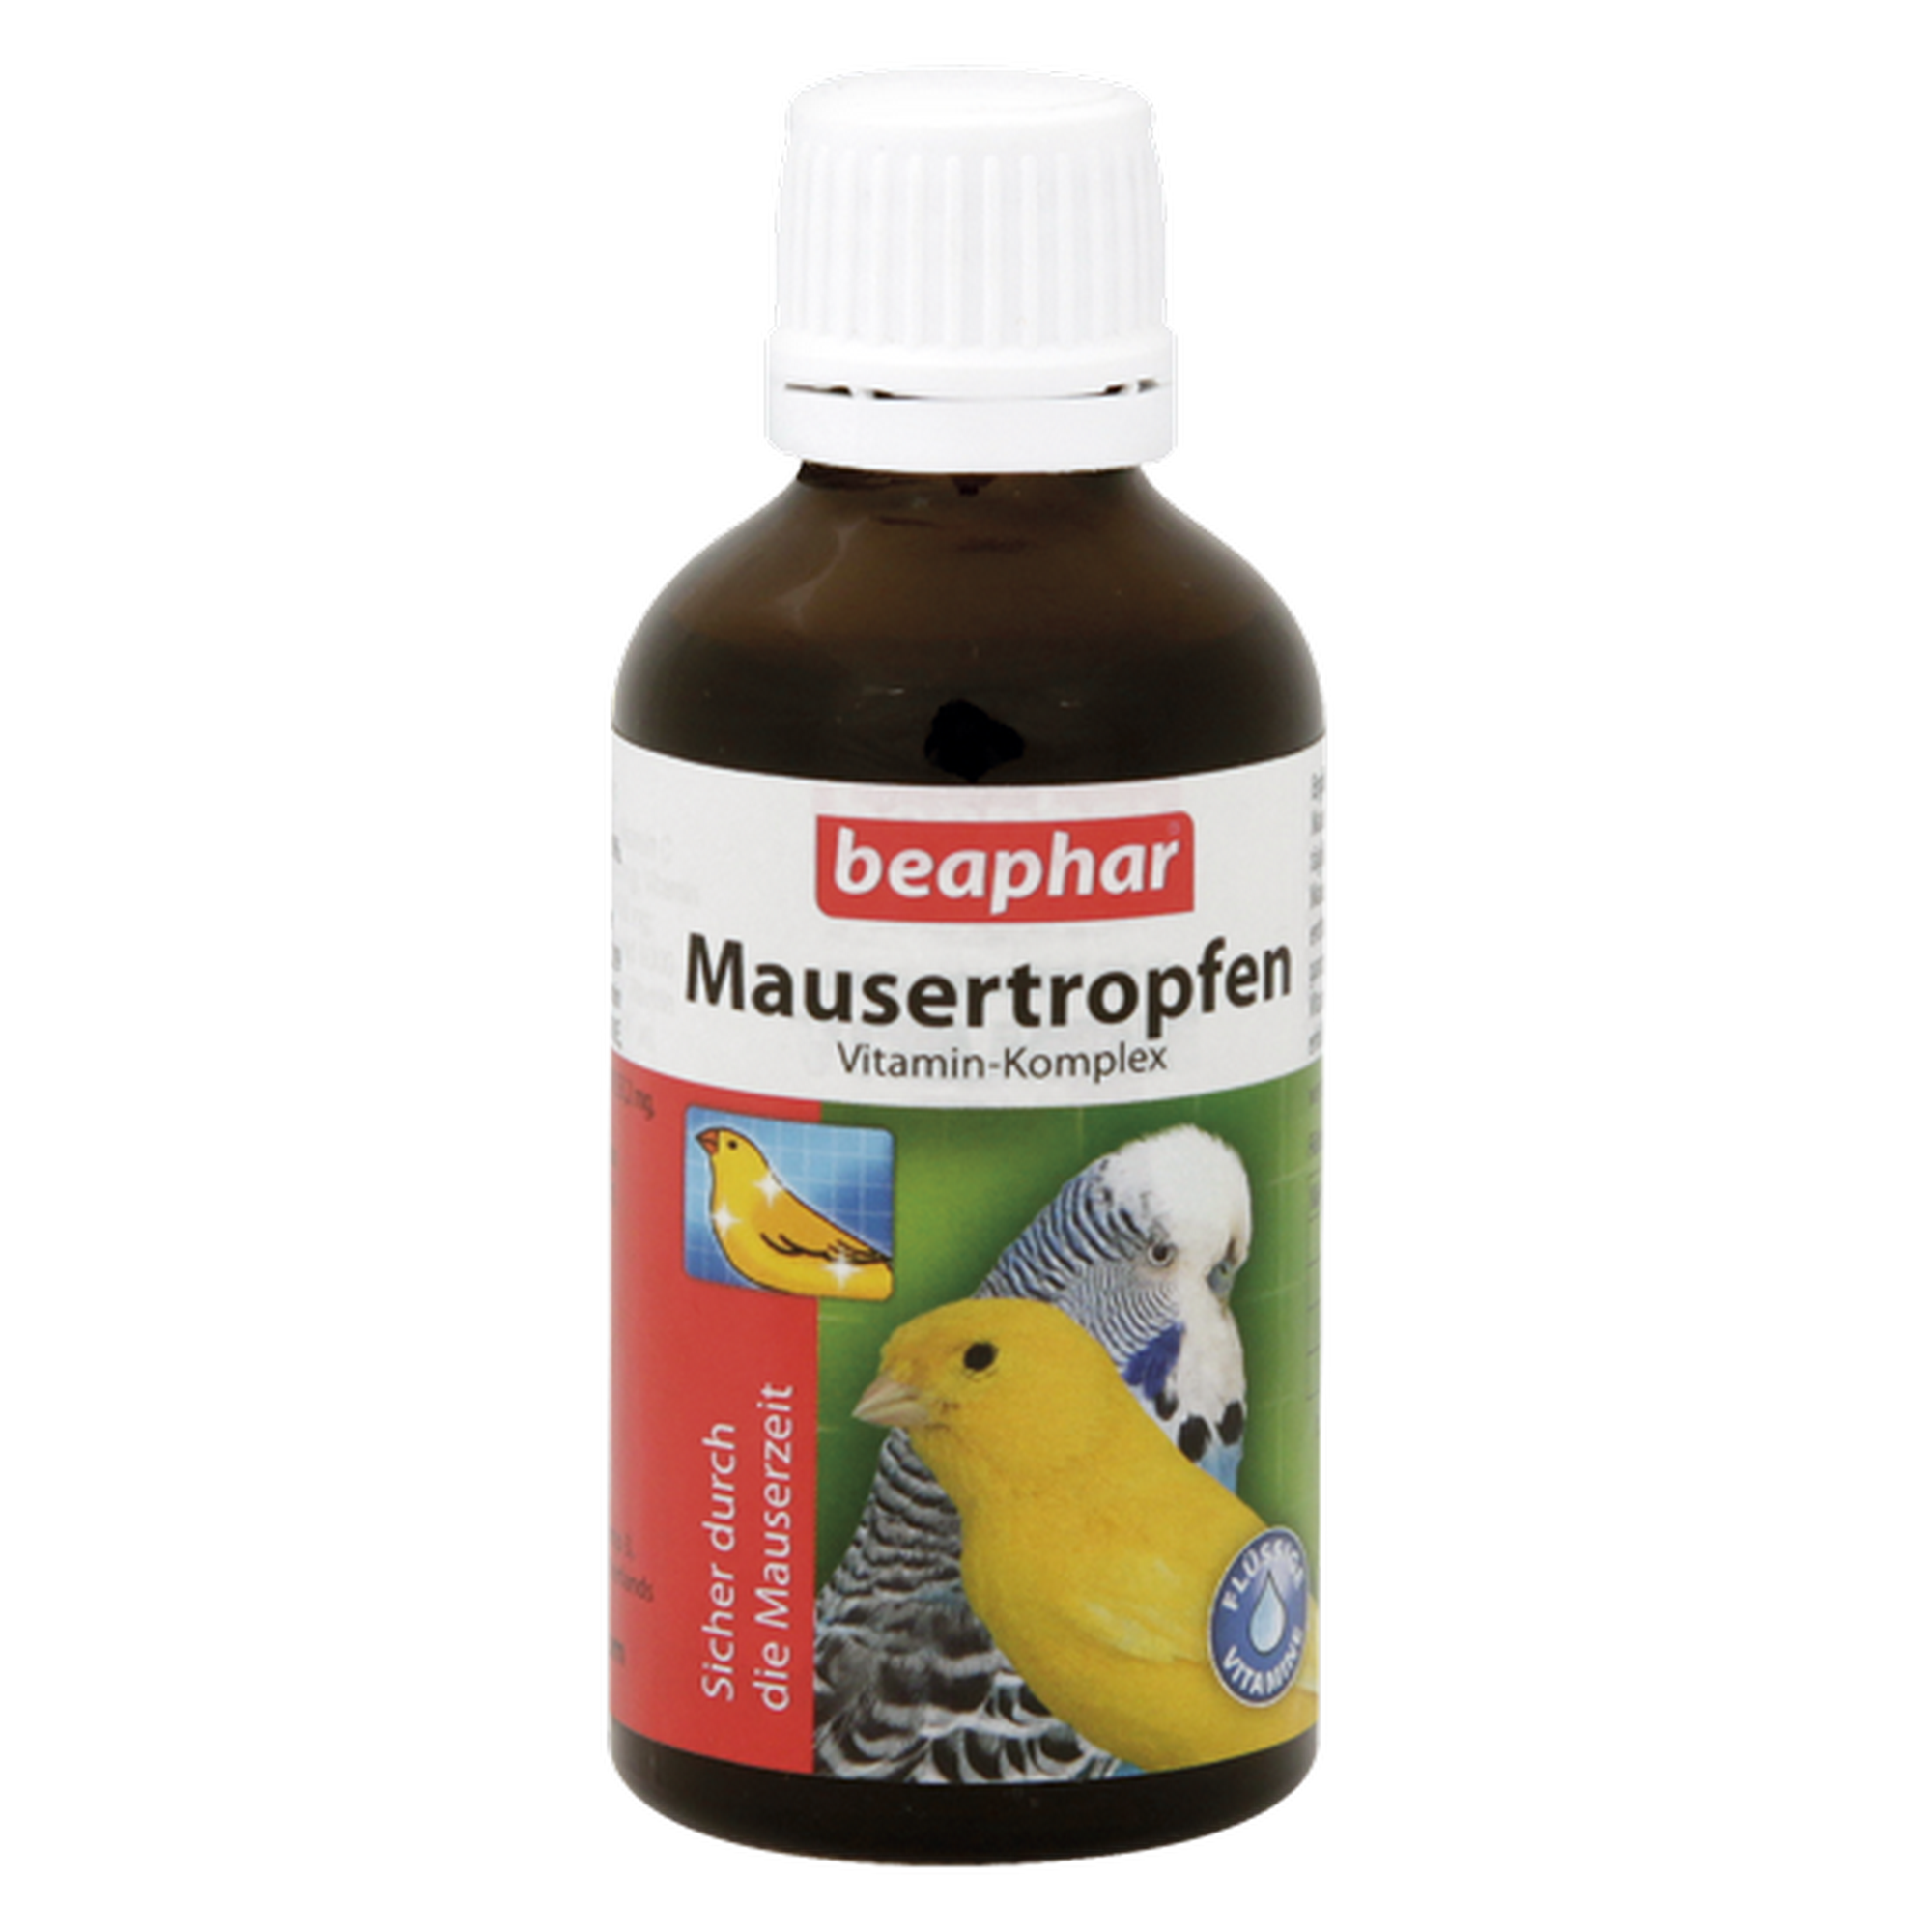 Mausertropfen 50ml + product picture